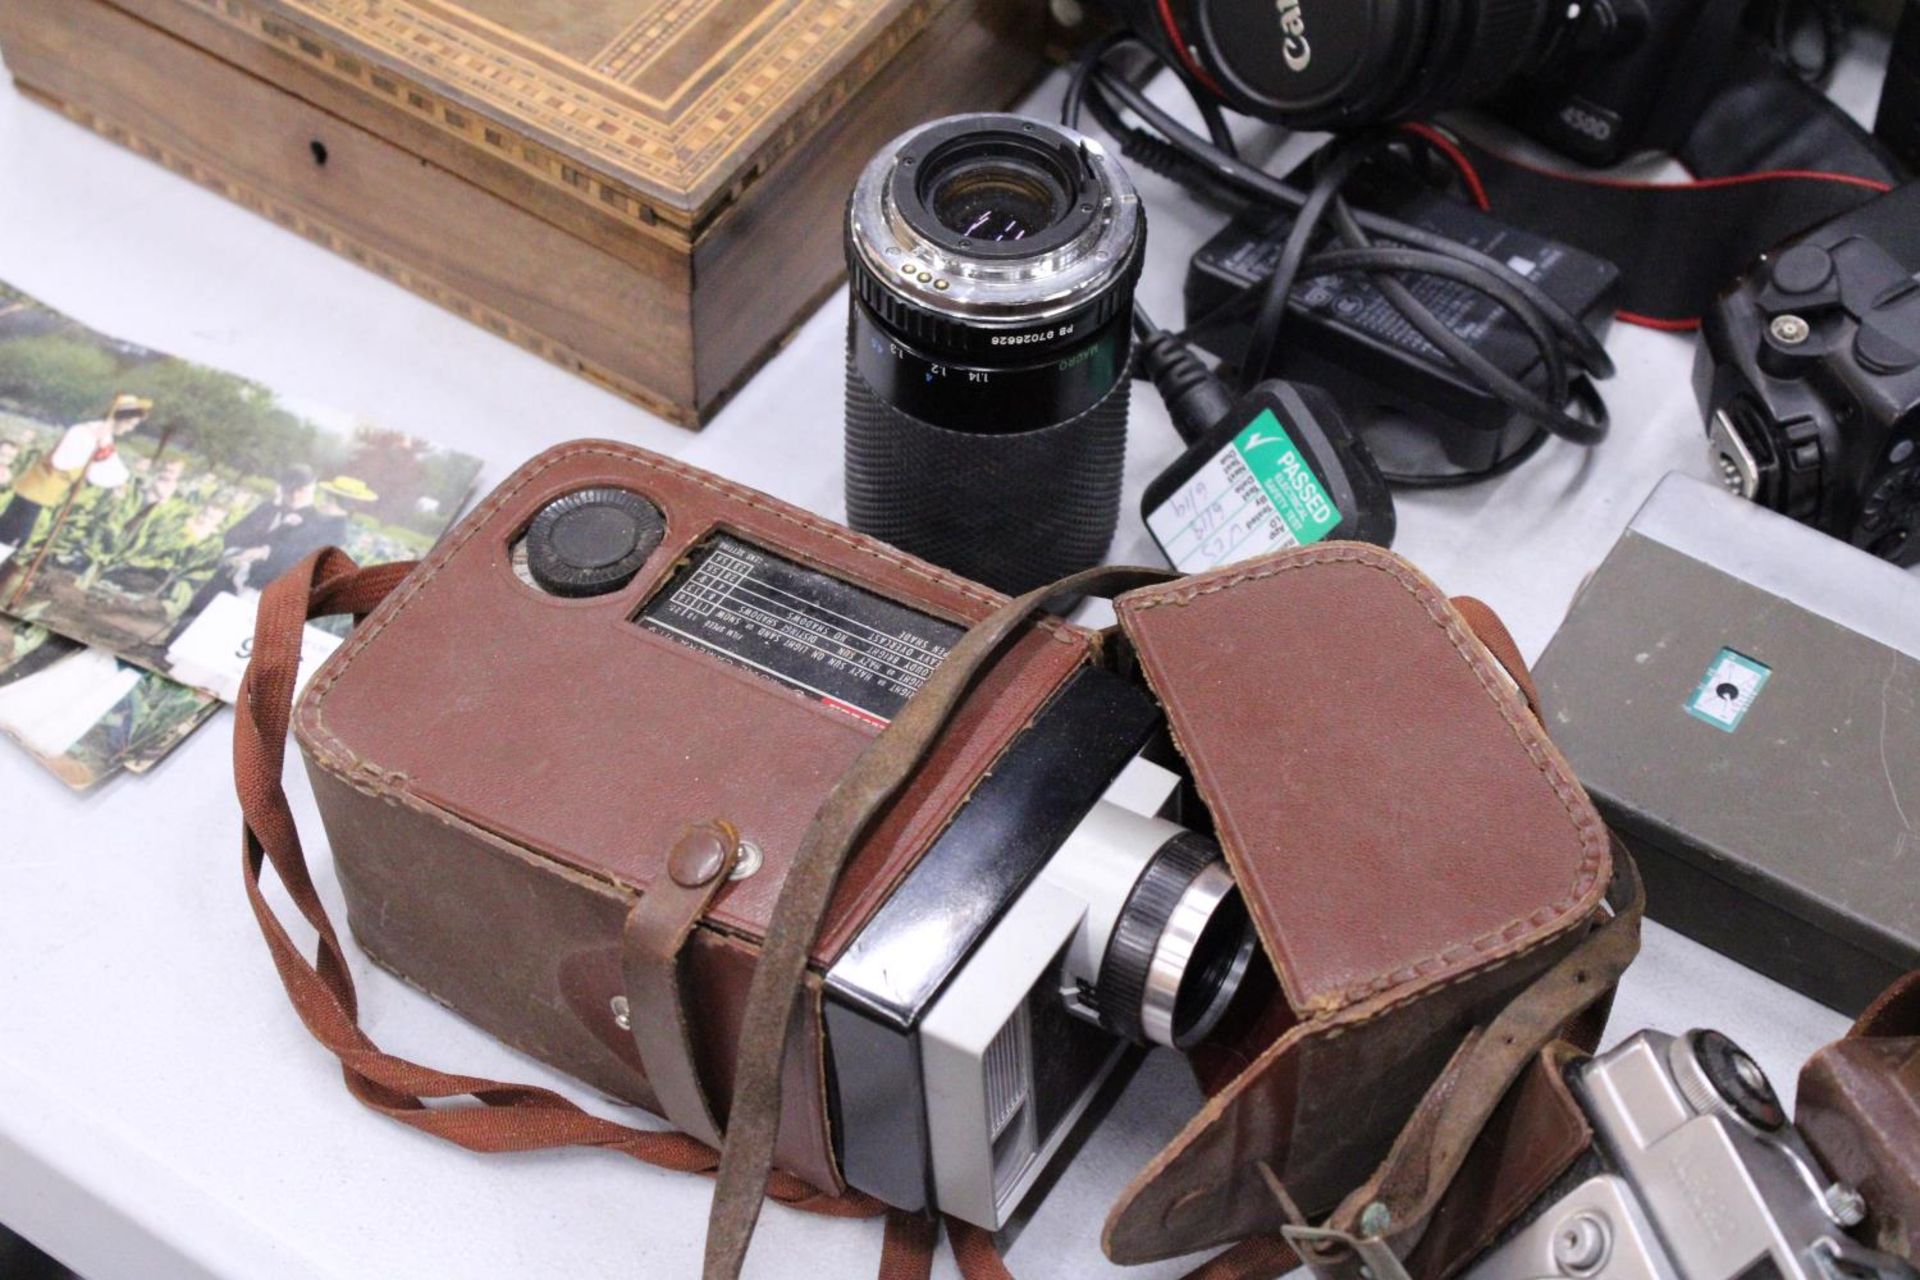 A COLLECTION OF CAMERAS TO INCLUDE A CANON EOS WITH BATTERY PACK, LENS AND BAG, PLUS A VINTAGE - Image 3 of 6